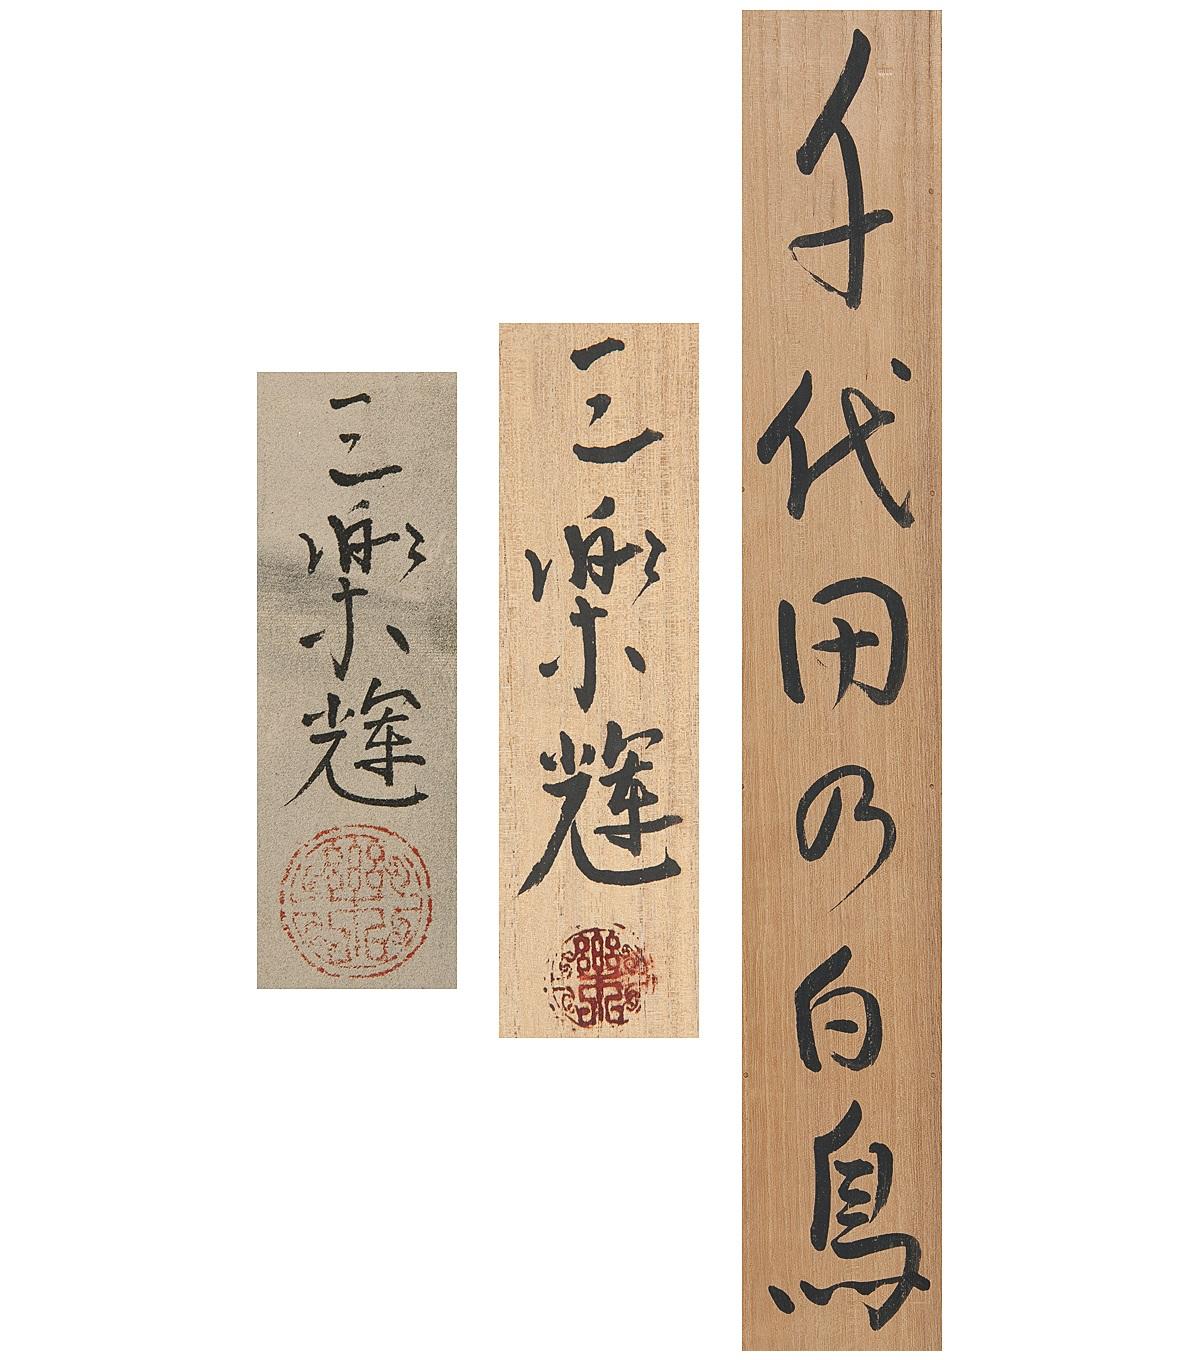 Scroll Painting Japanese First Half of the 20th Century by Kano Sanraku In Good Condition For Sale In Amsterdam, Noord Holland